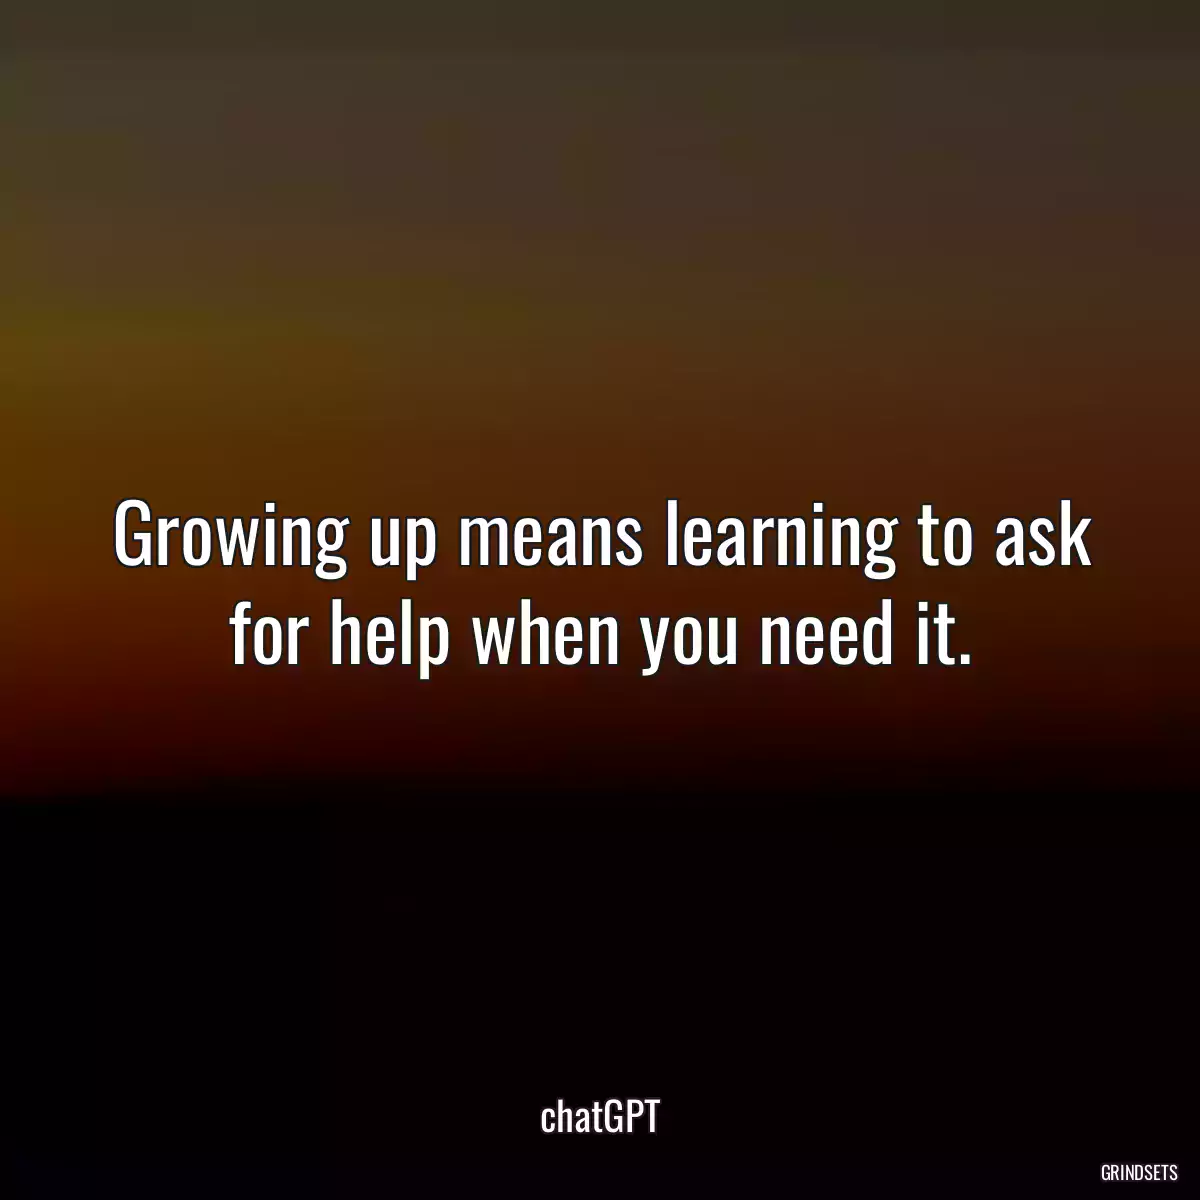 Growing up means learning to ask for help when you need it.